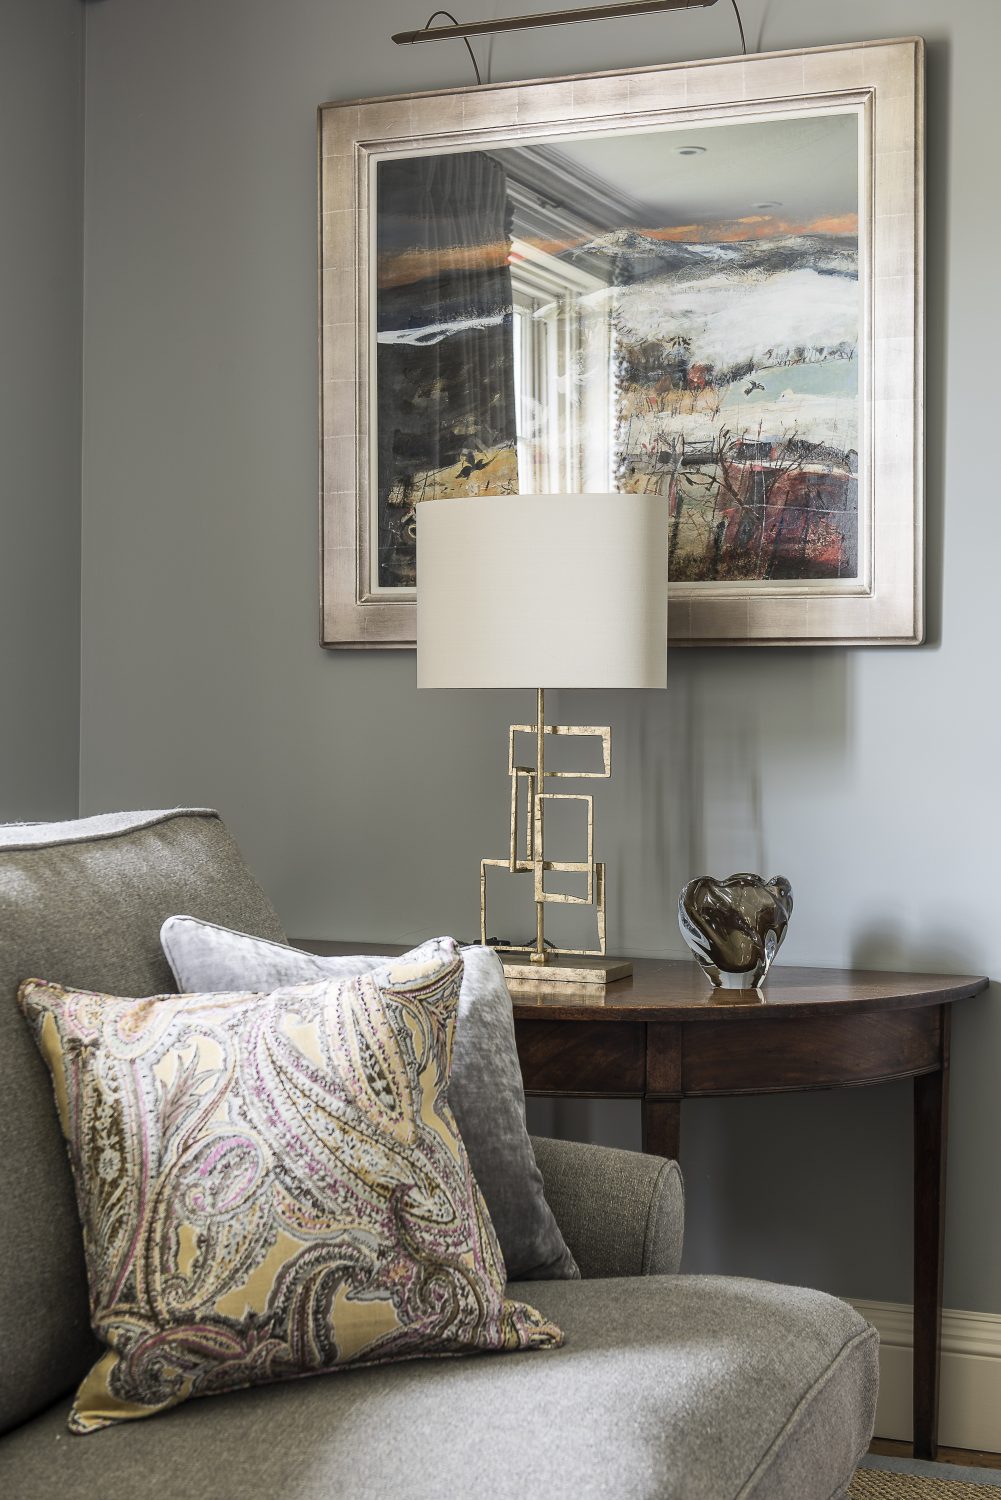 More bookshelves in the drawing room. The oversized ottoman is upholstered in a William Yerwood jute stripe. The patterned cushions are a Nina Campbell linen. The brass lamp is by Porto Romana. The painting client’s own